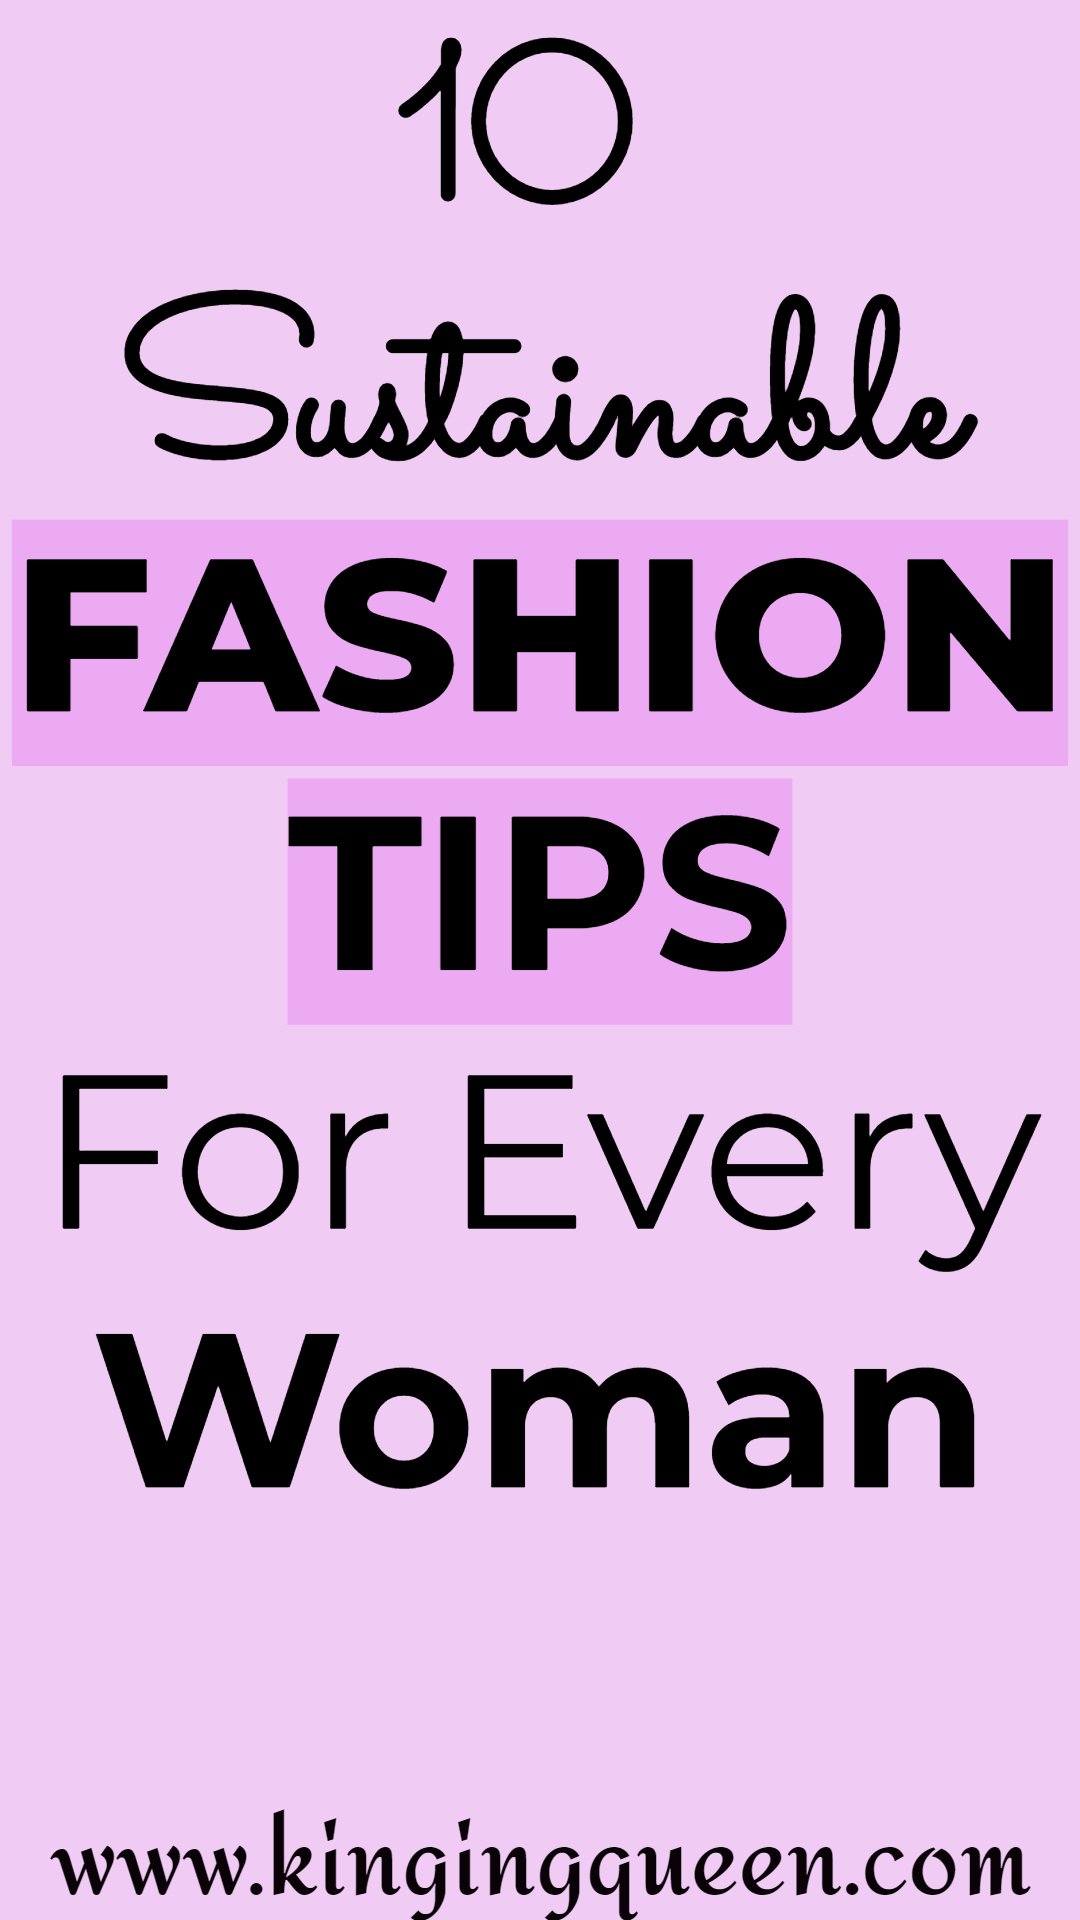 Graphic showing sustainable fashion tips for every woman